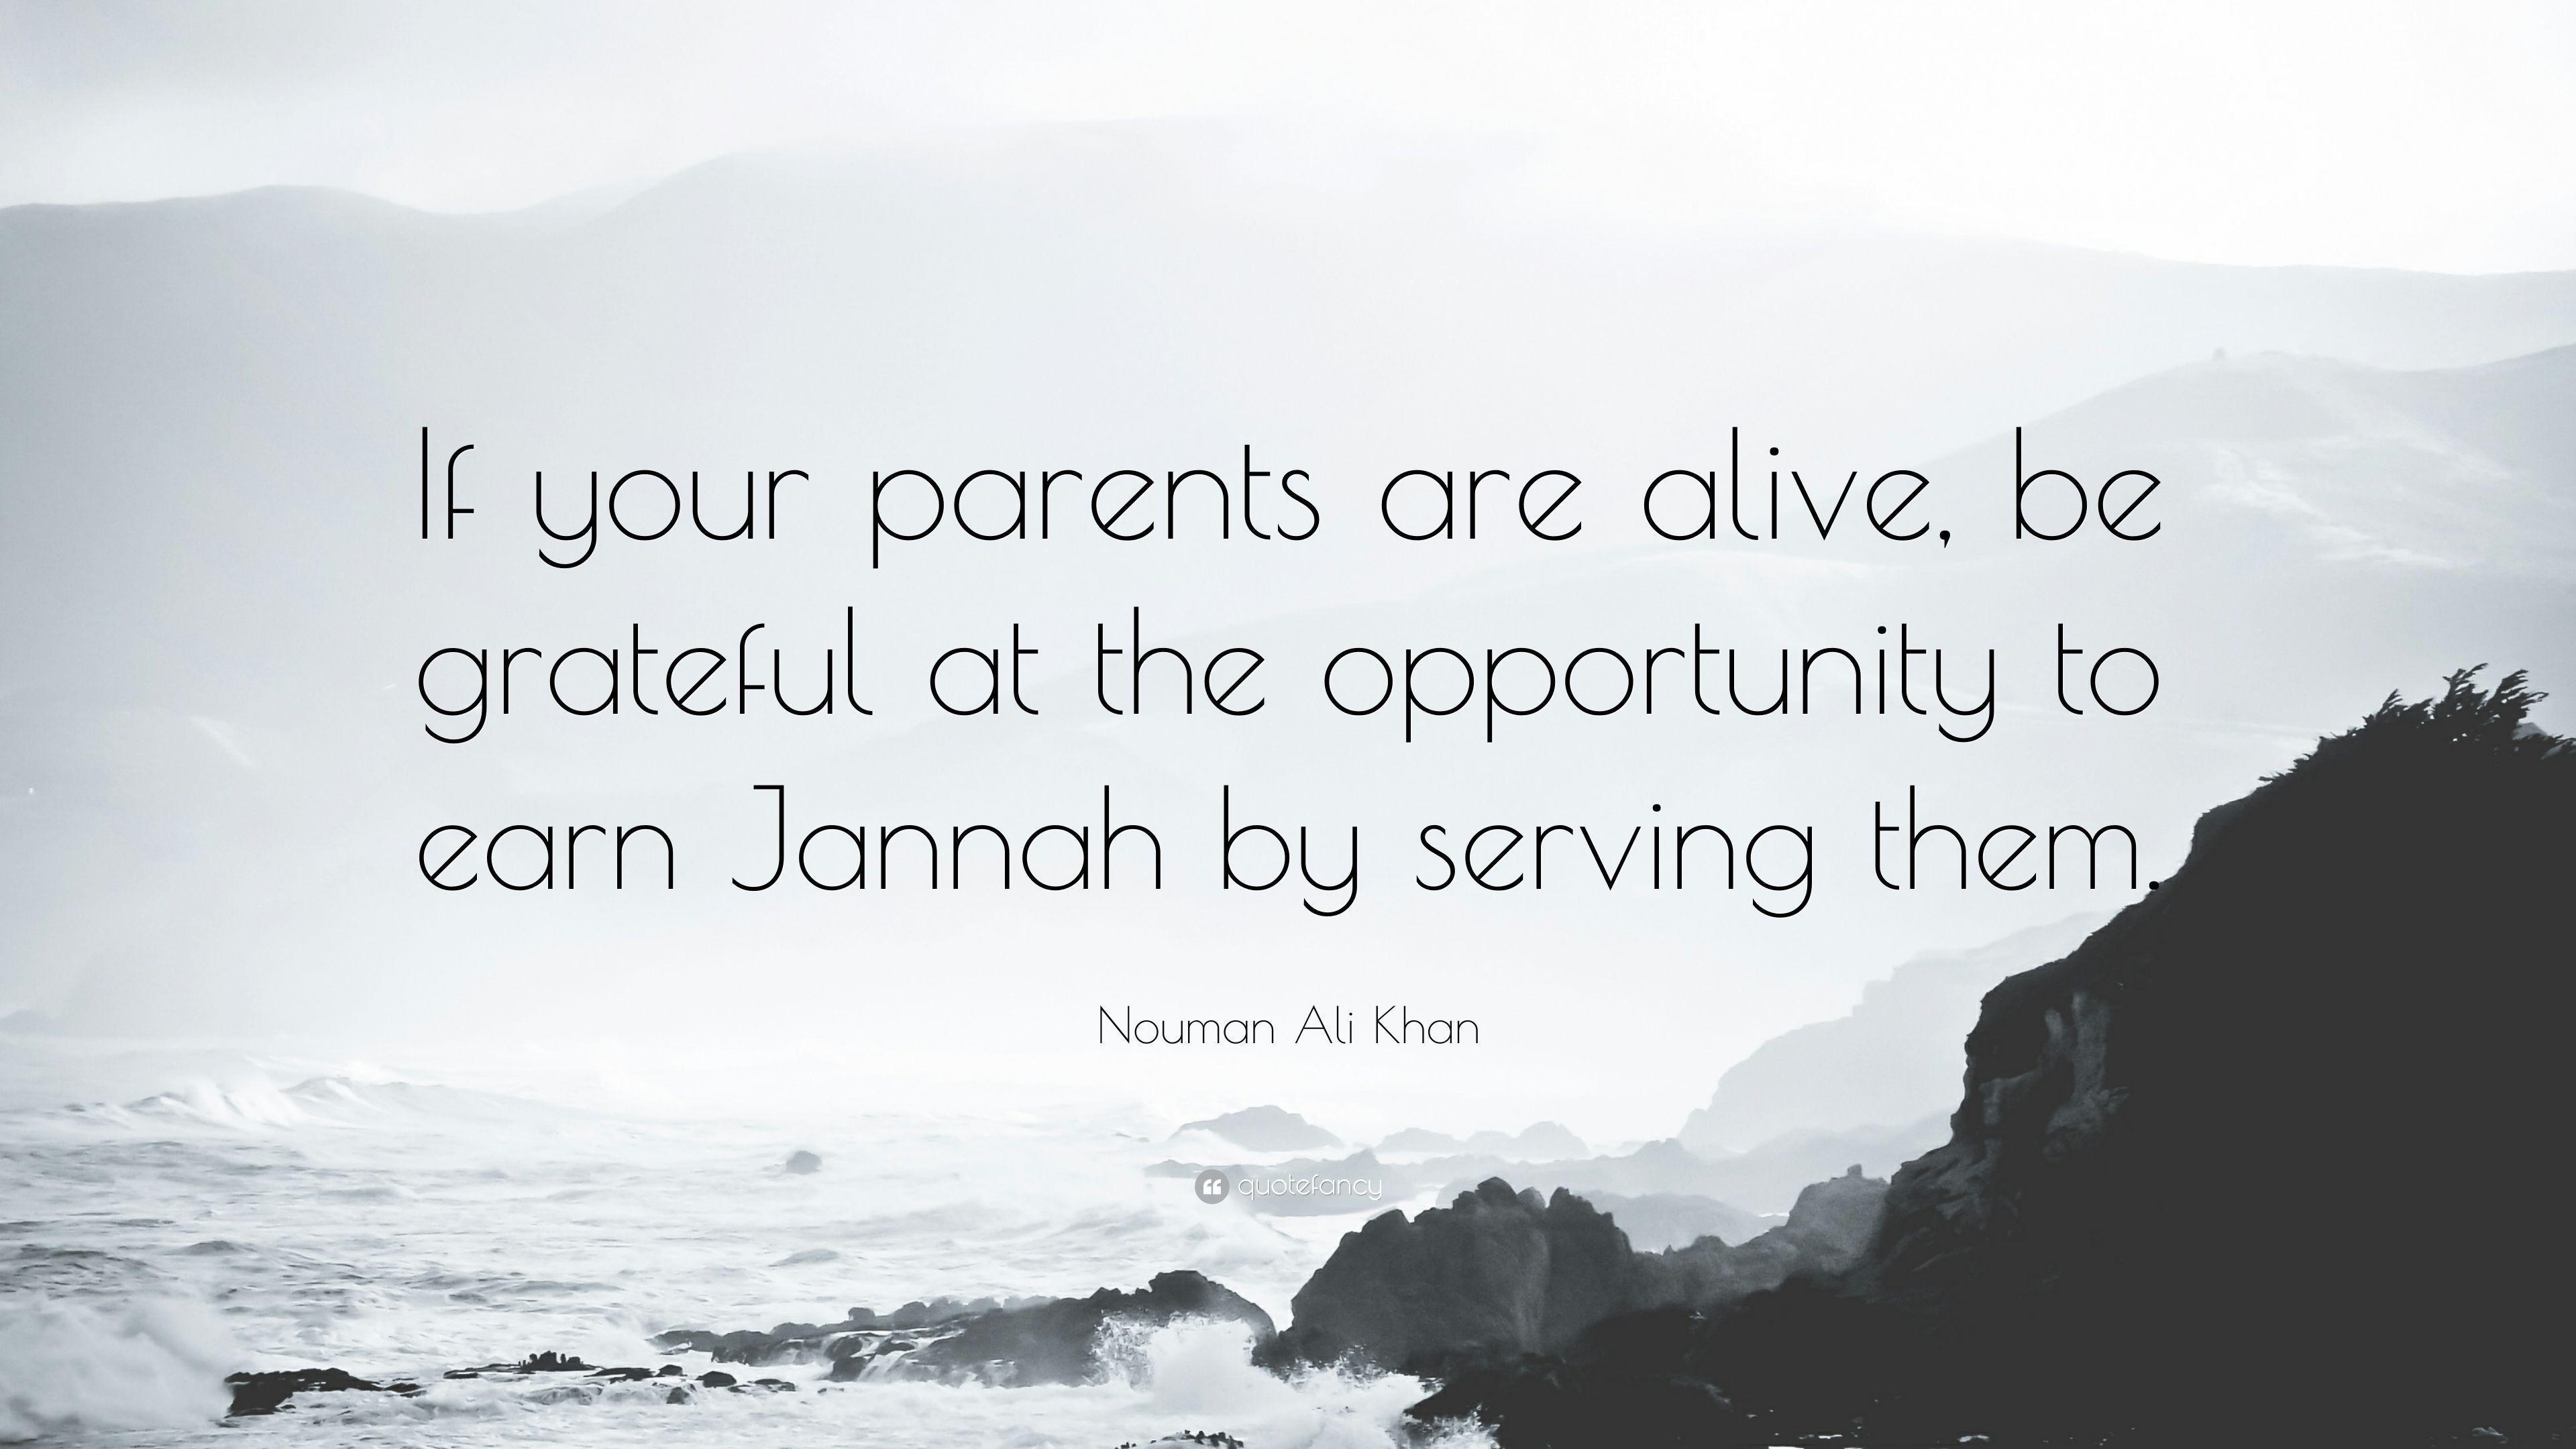 Nouman Ali Khan Quote: “If your parents are alive, be grateful at